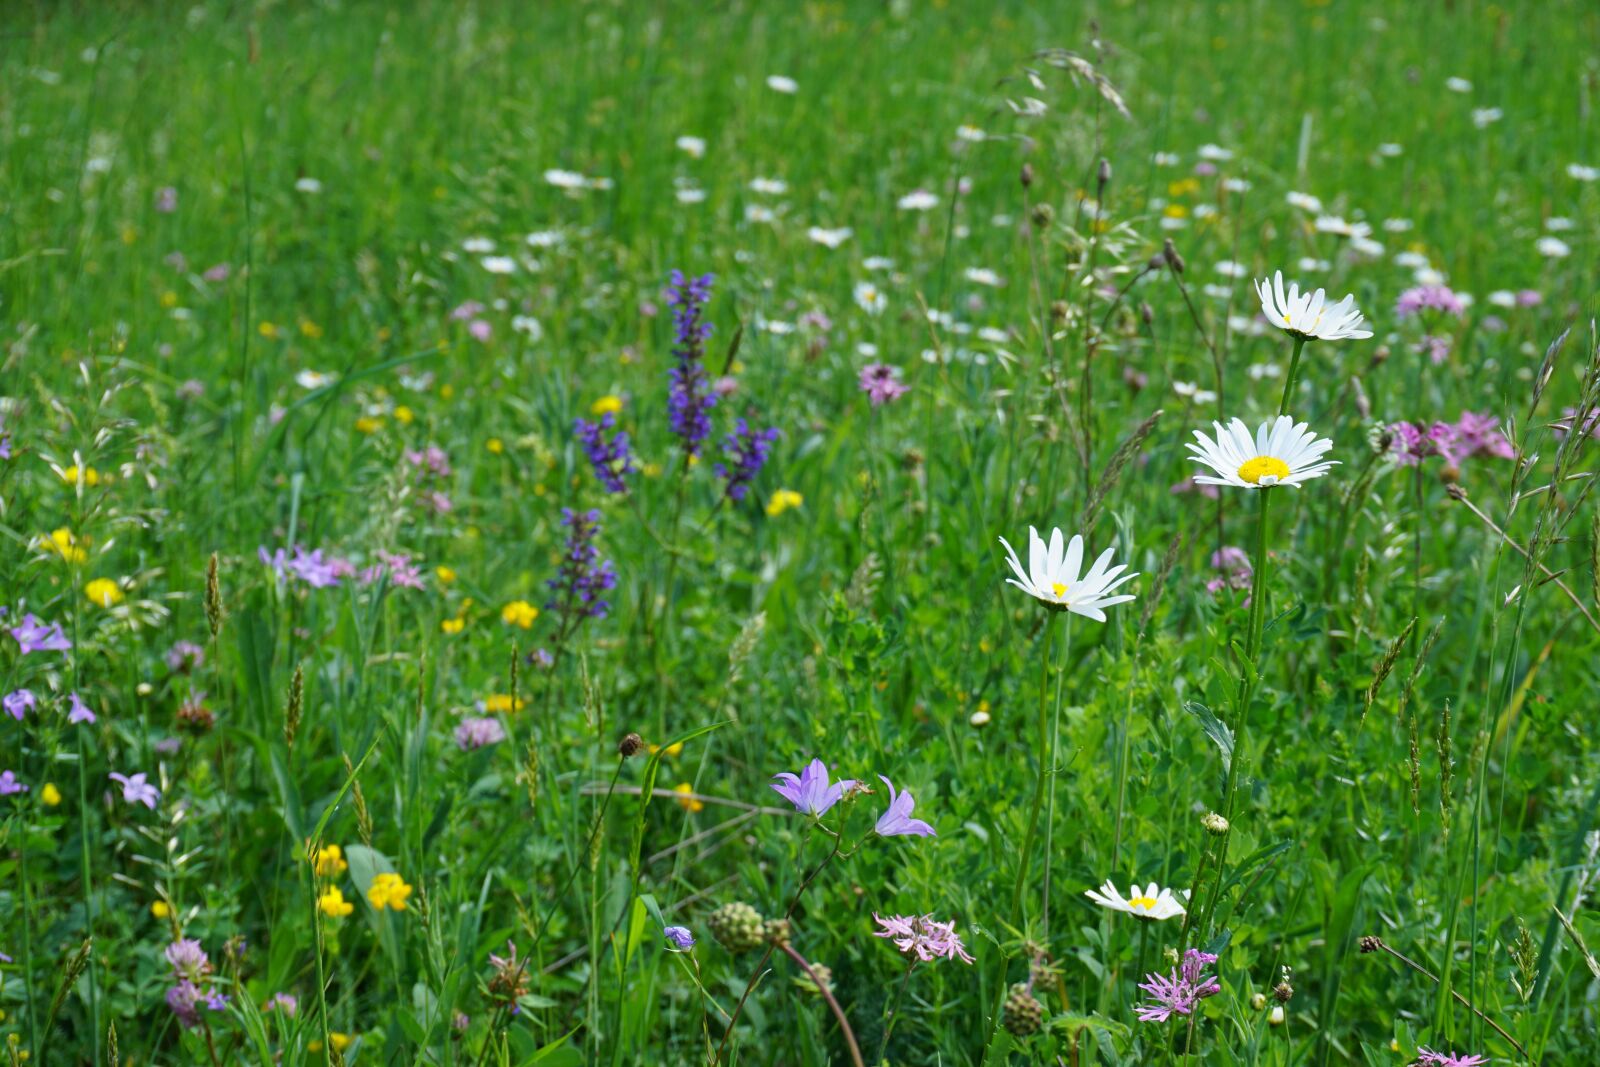 Sony a6000 sample photo. Flower meadow, flowers, spring photography